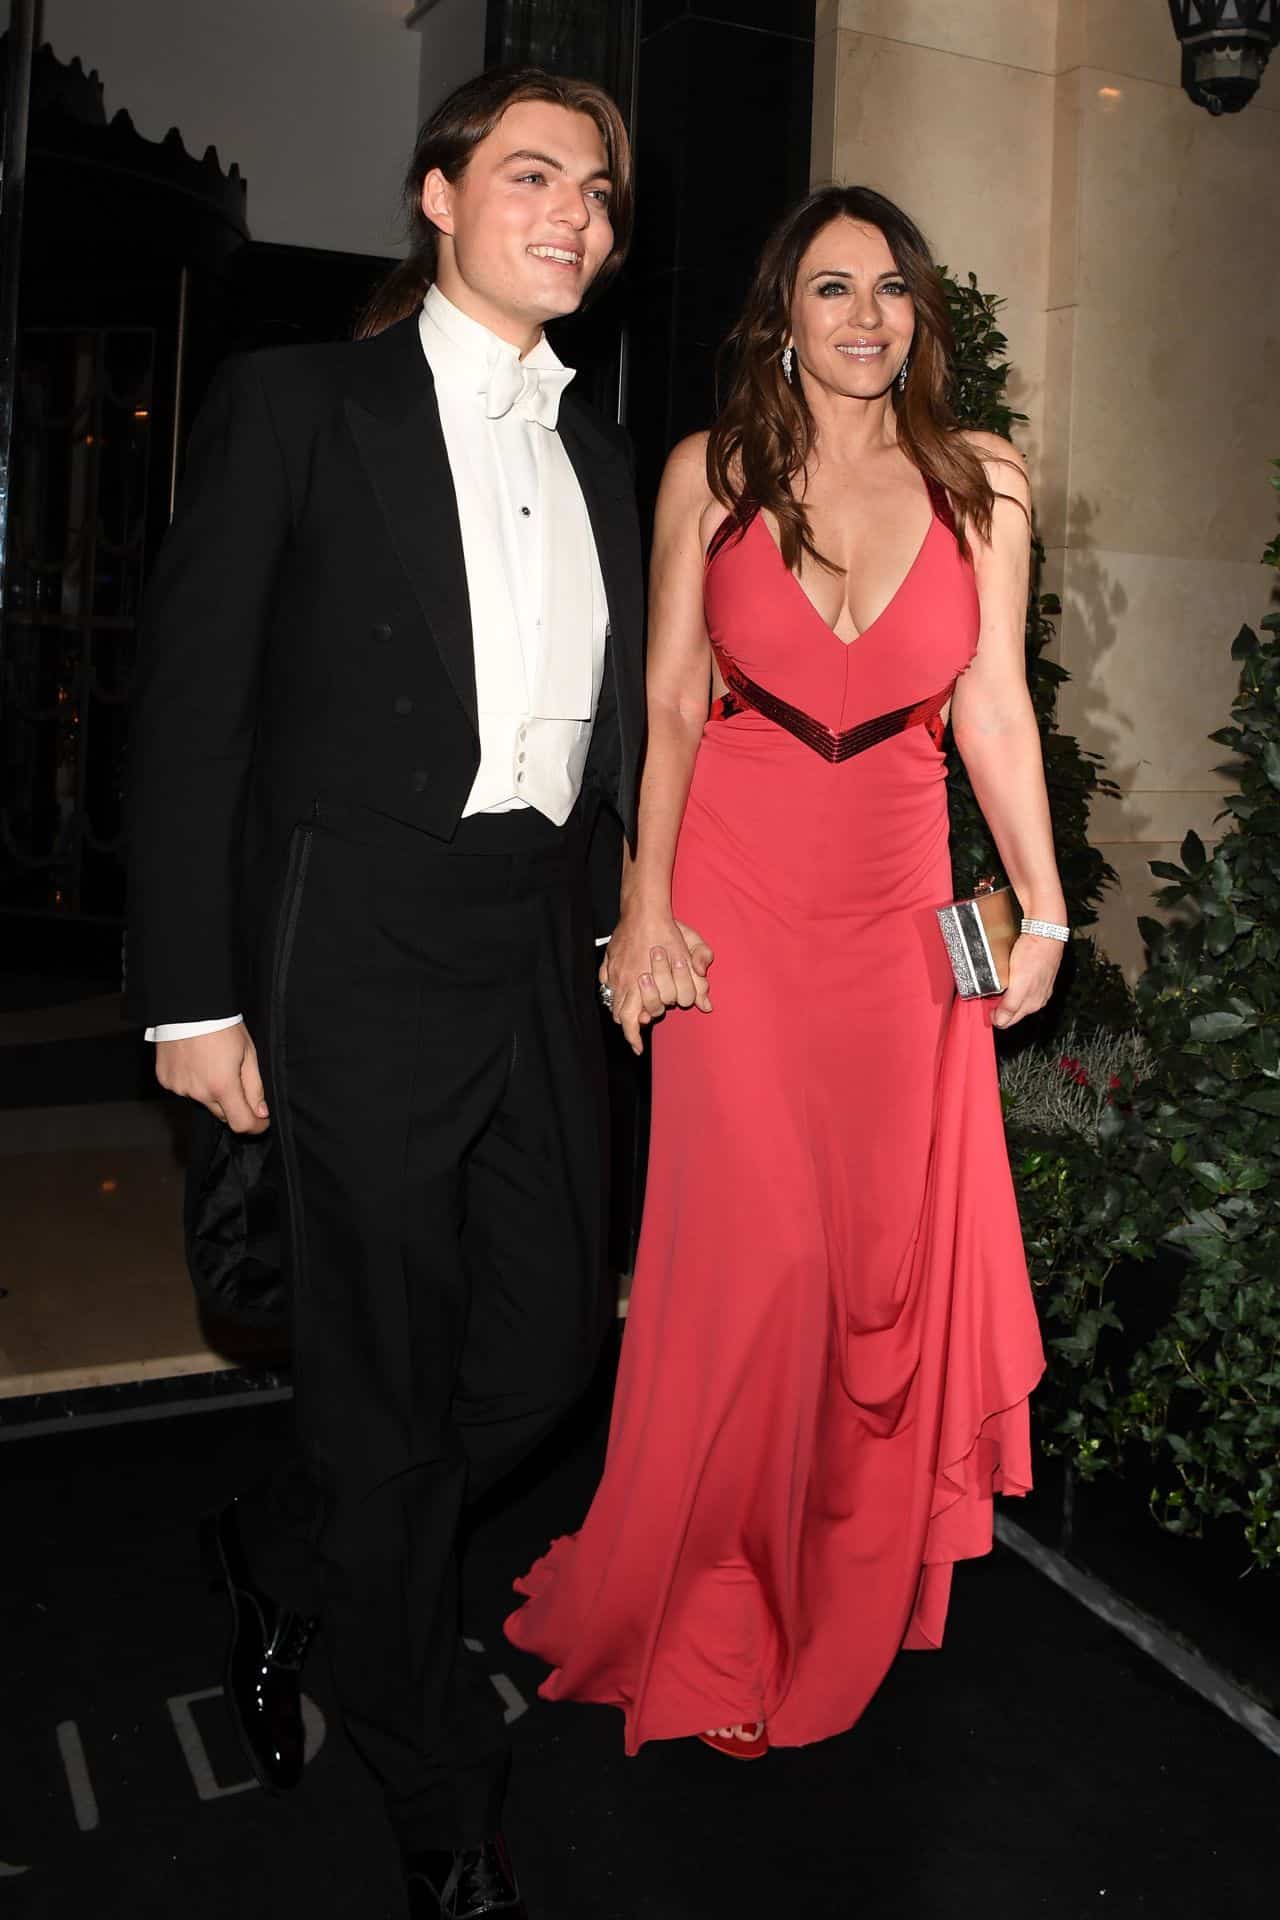 Elizabeth Hurley Stuns in a Red Dress at Joan Collins’ 88th Birthday Party